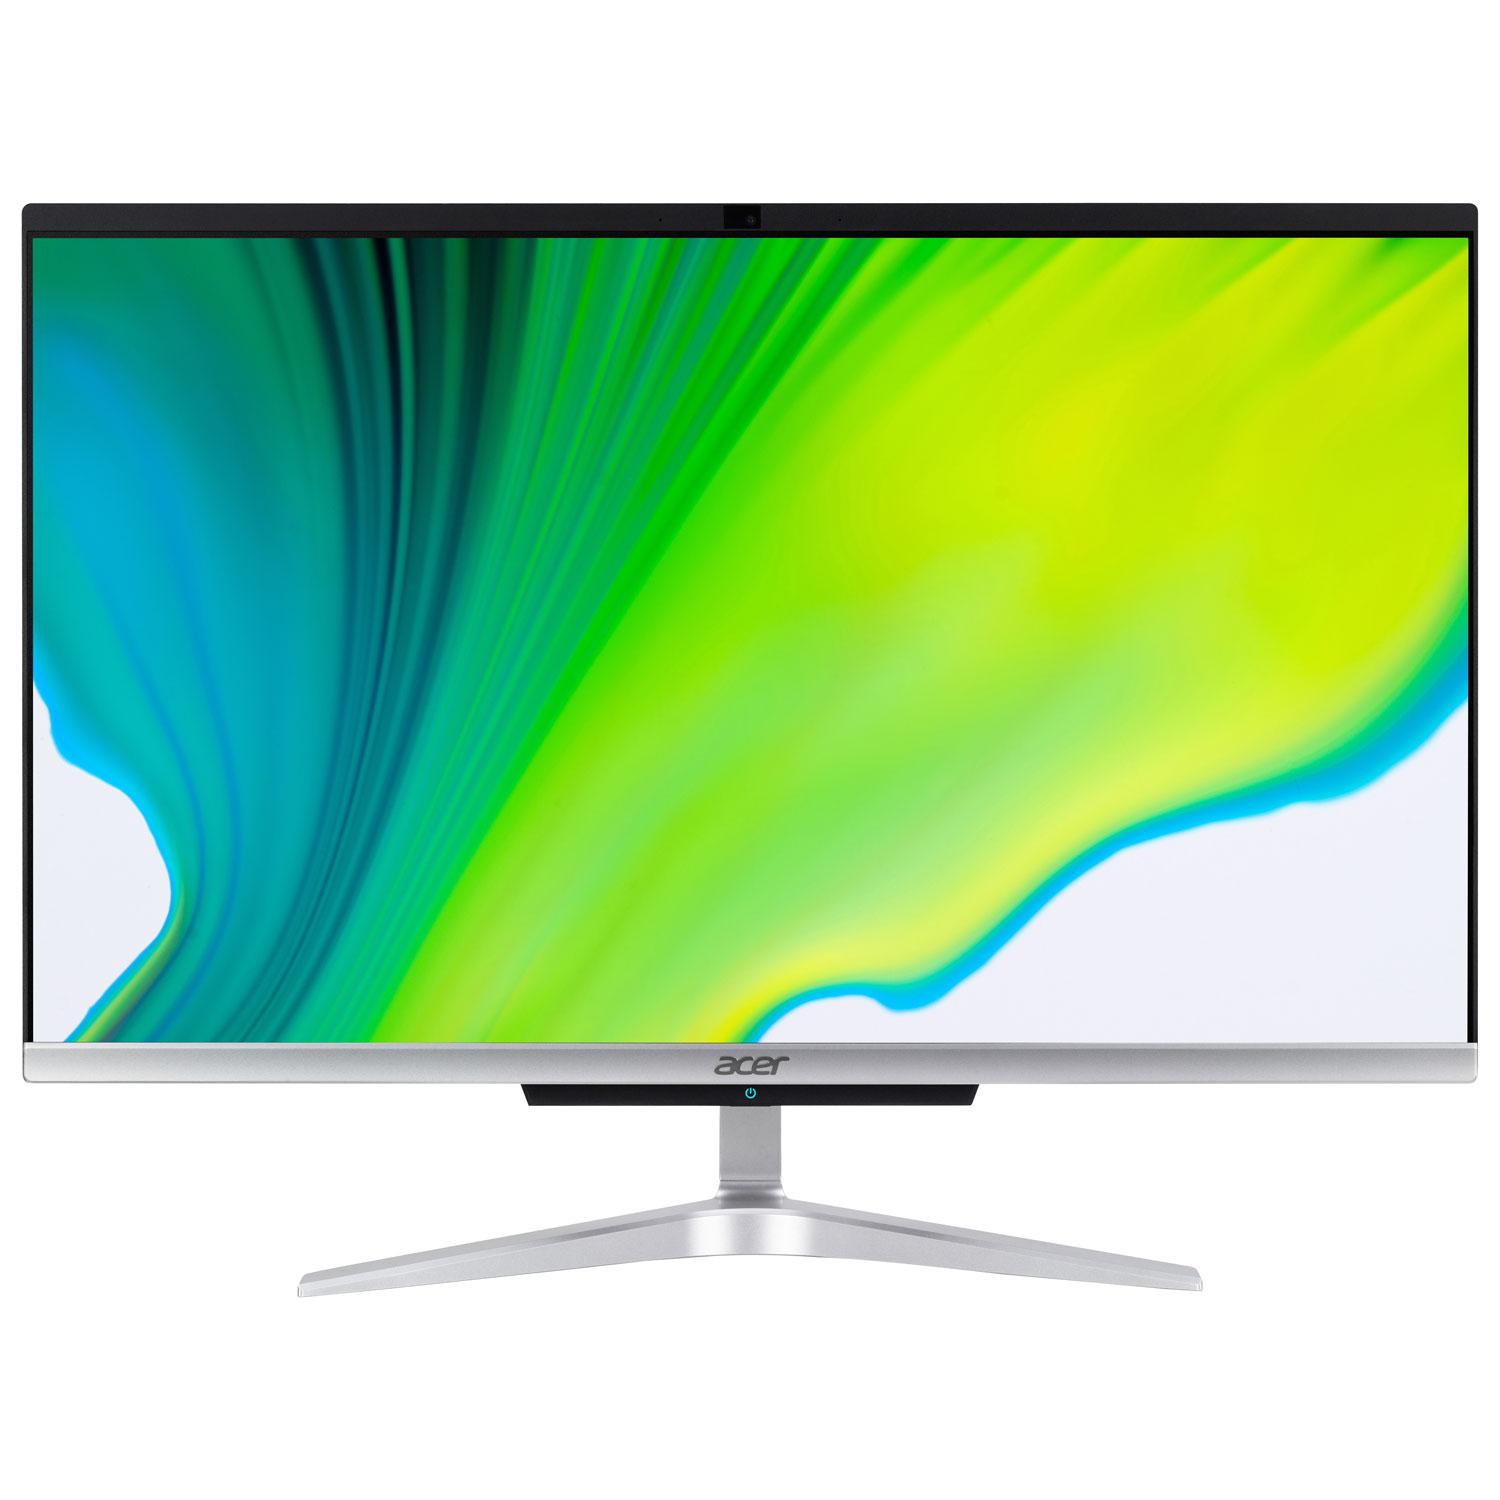 Acer Aspire C24 All-in-One PC (Intel Core i3-1215U/512GB SSD/8GB RAM) - Only at Best Buy